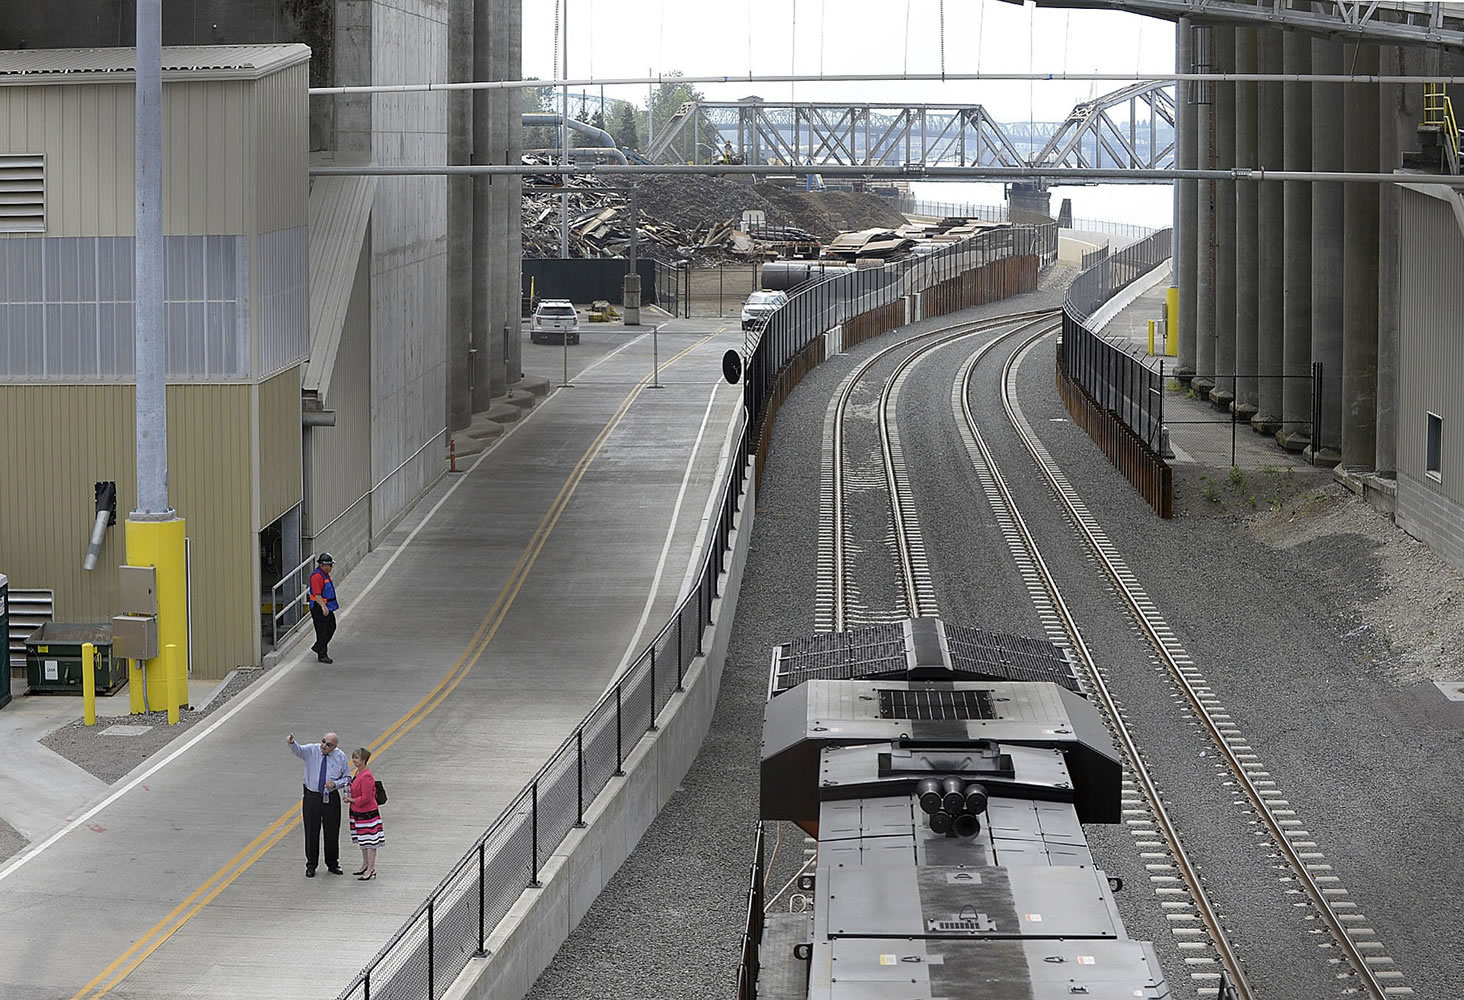 The Port of Vancouver on Thursday morning celebrated the completion of a new $30 million rail entrance project.